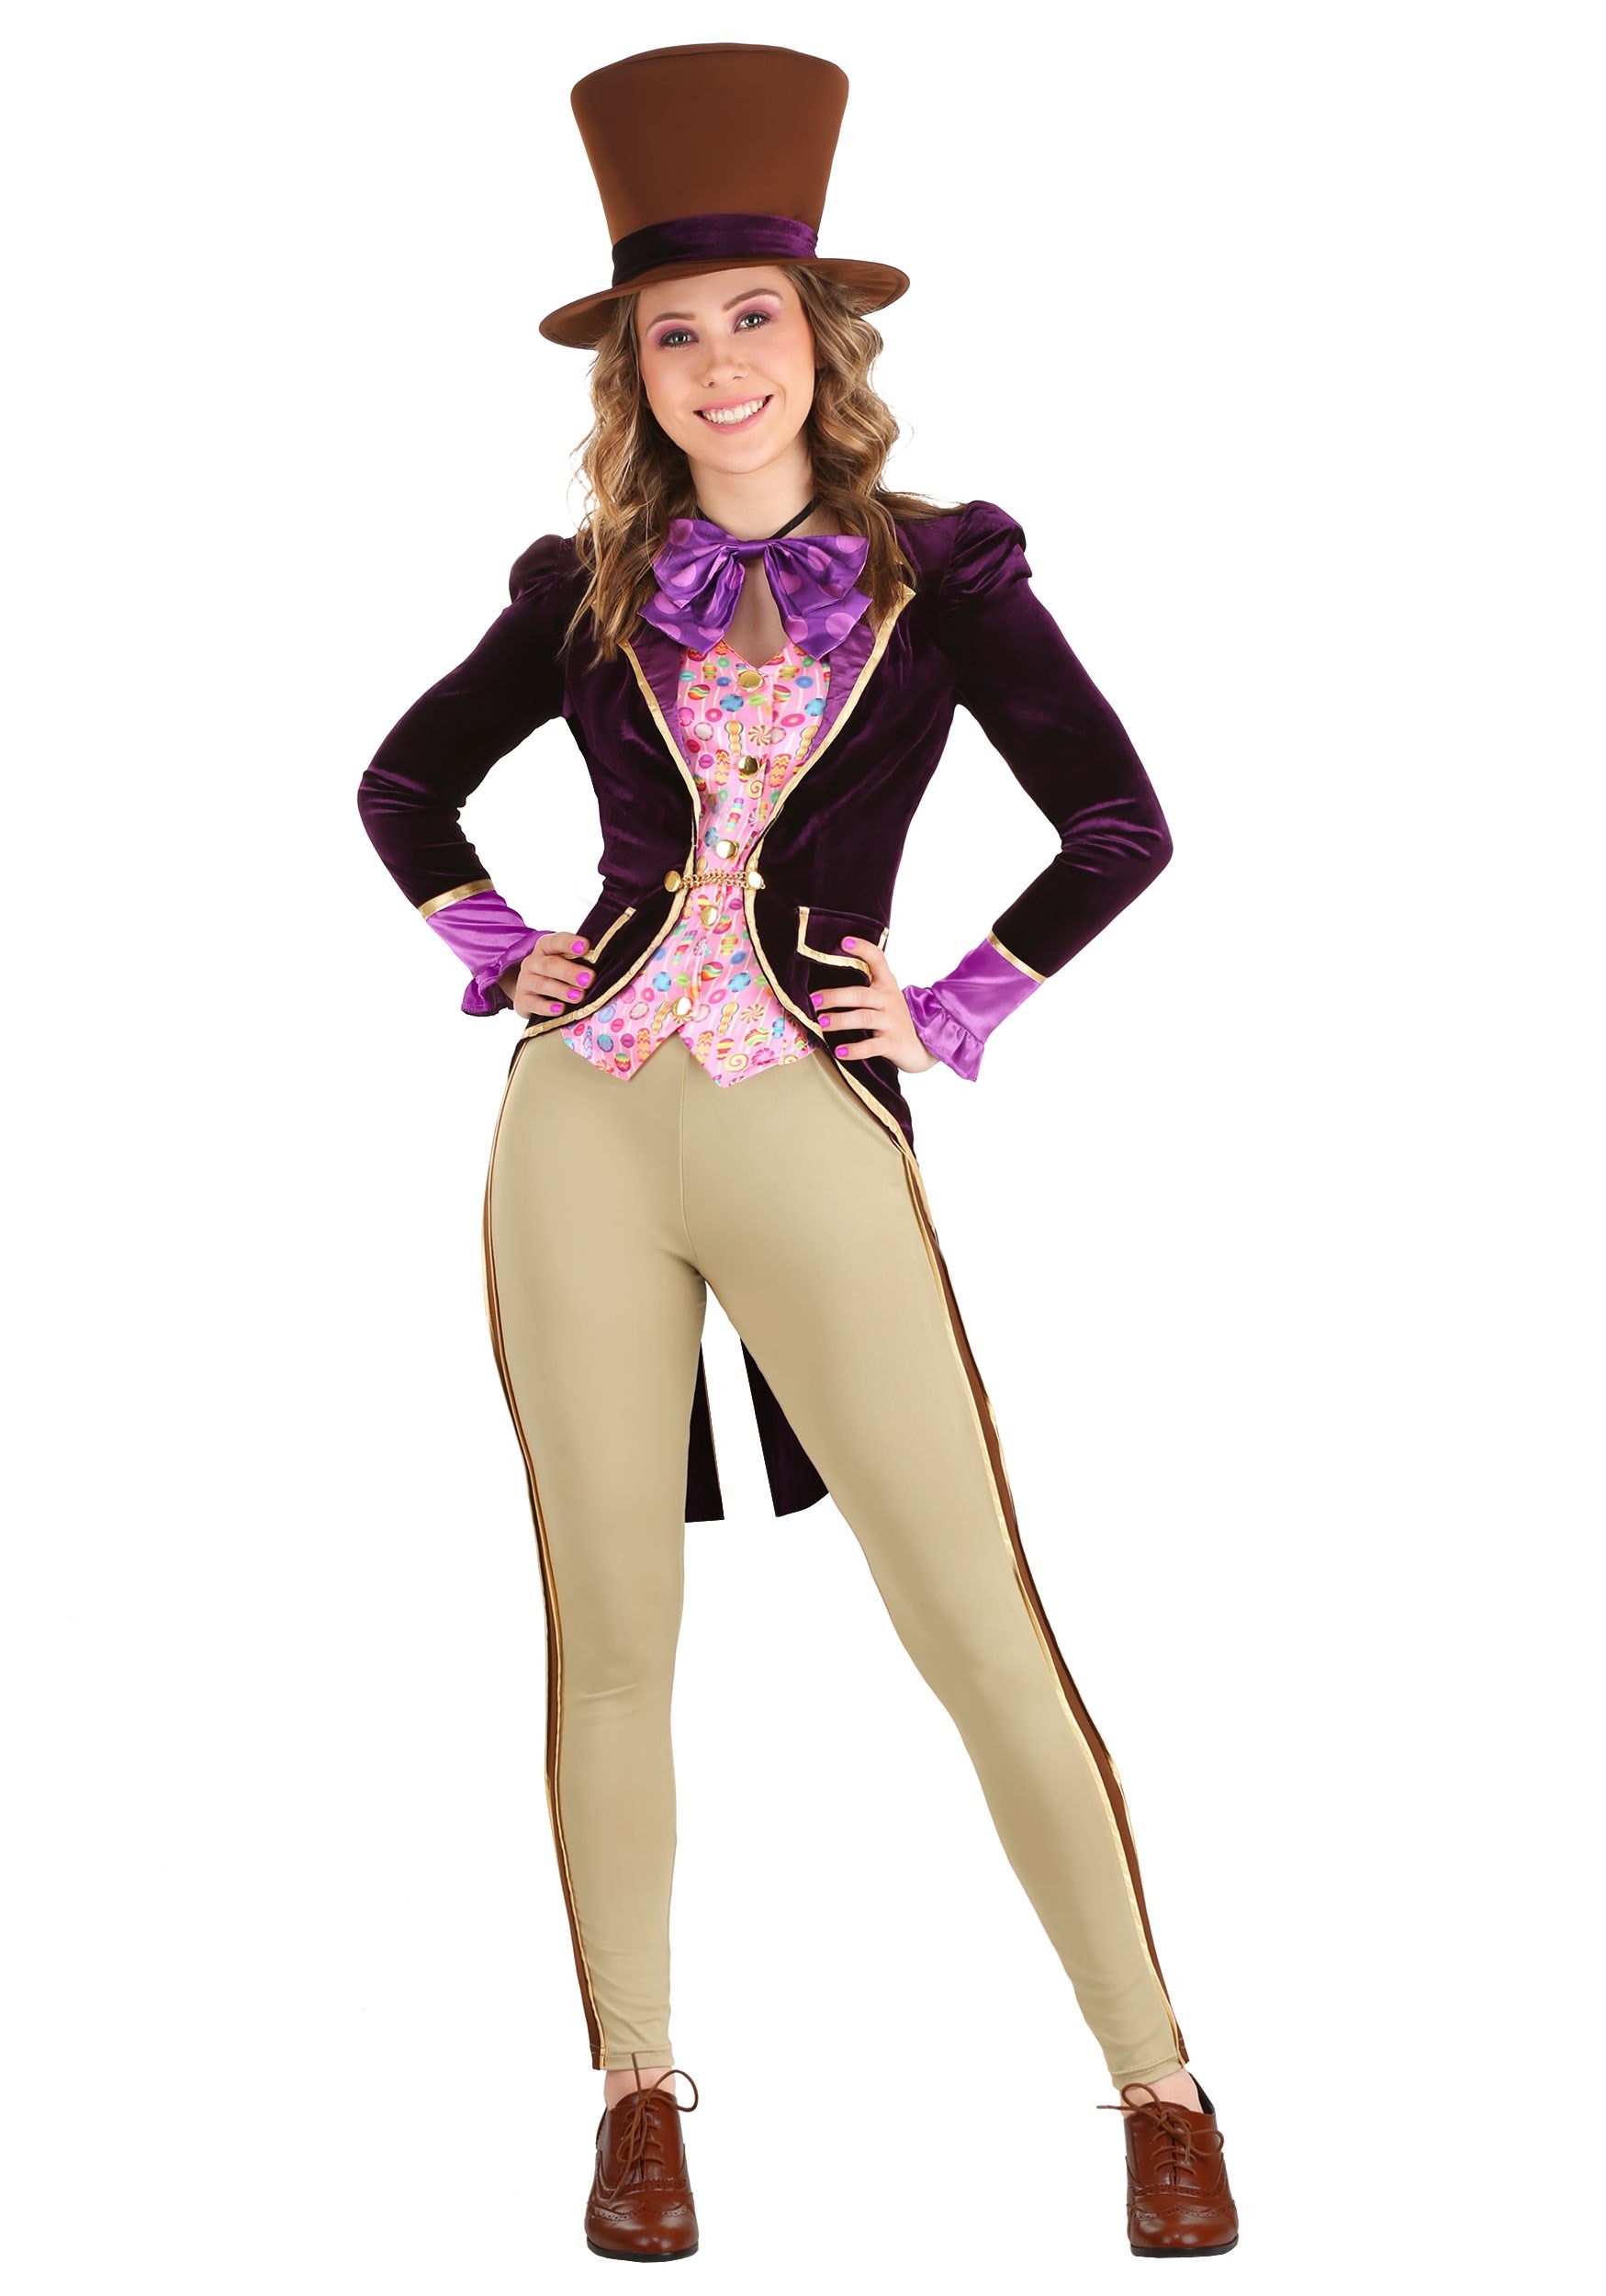 Photos - Fancy Dress Candy FUN Costumes  Inventor Costume for Women Pink/Purple/Beige FU 